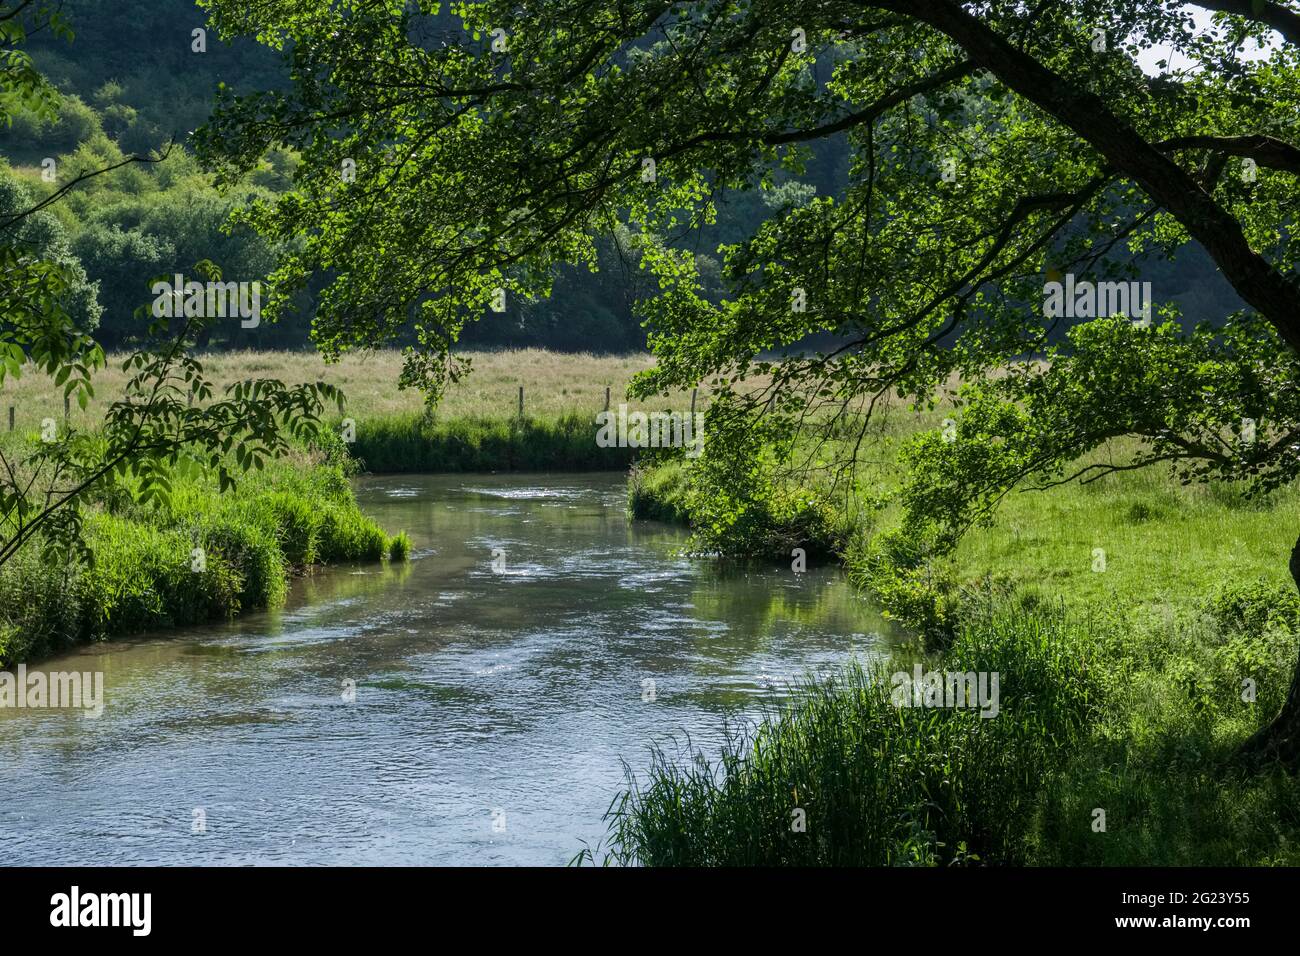 The Valley of Crevon in Ry (northern France) Stock Photo